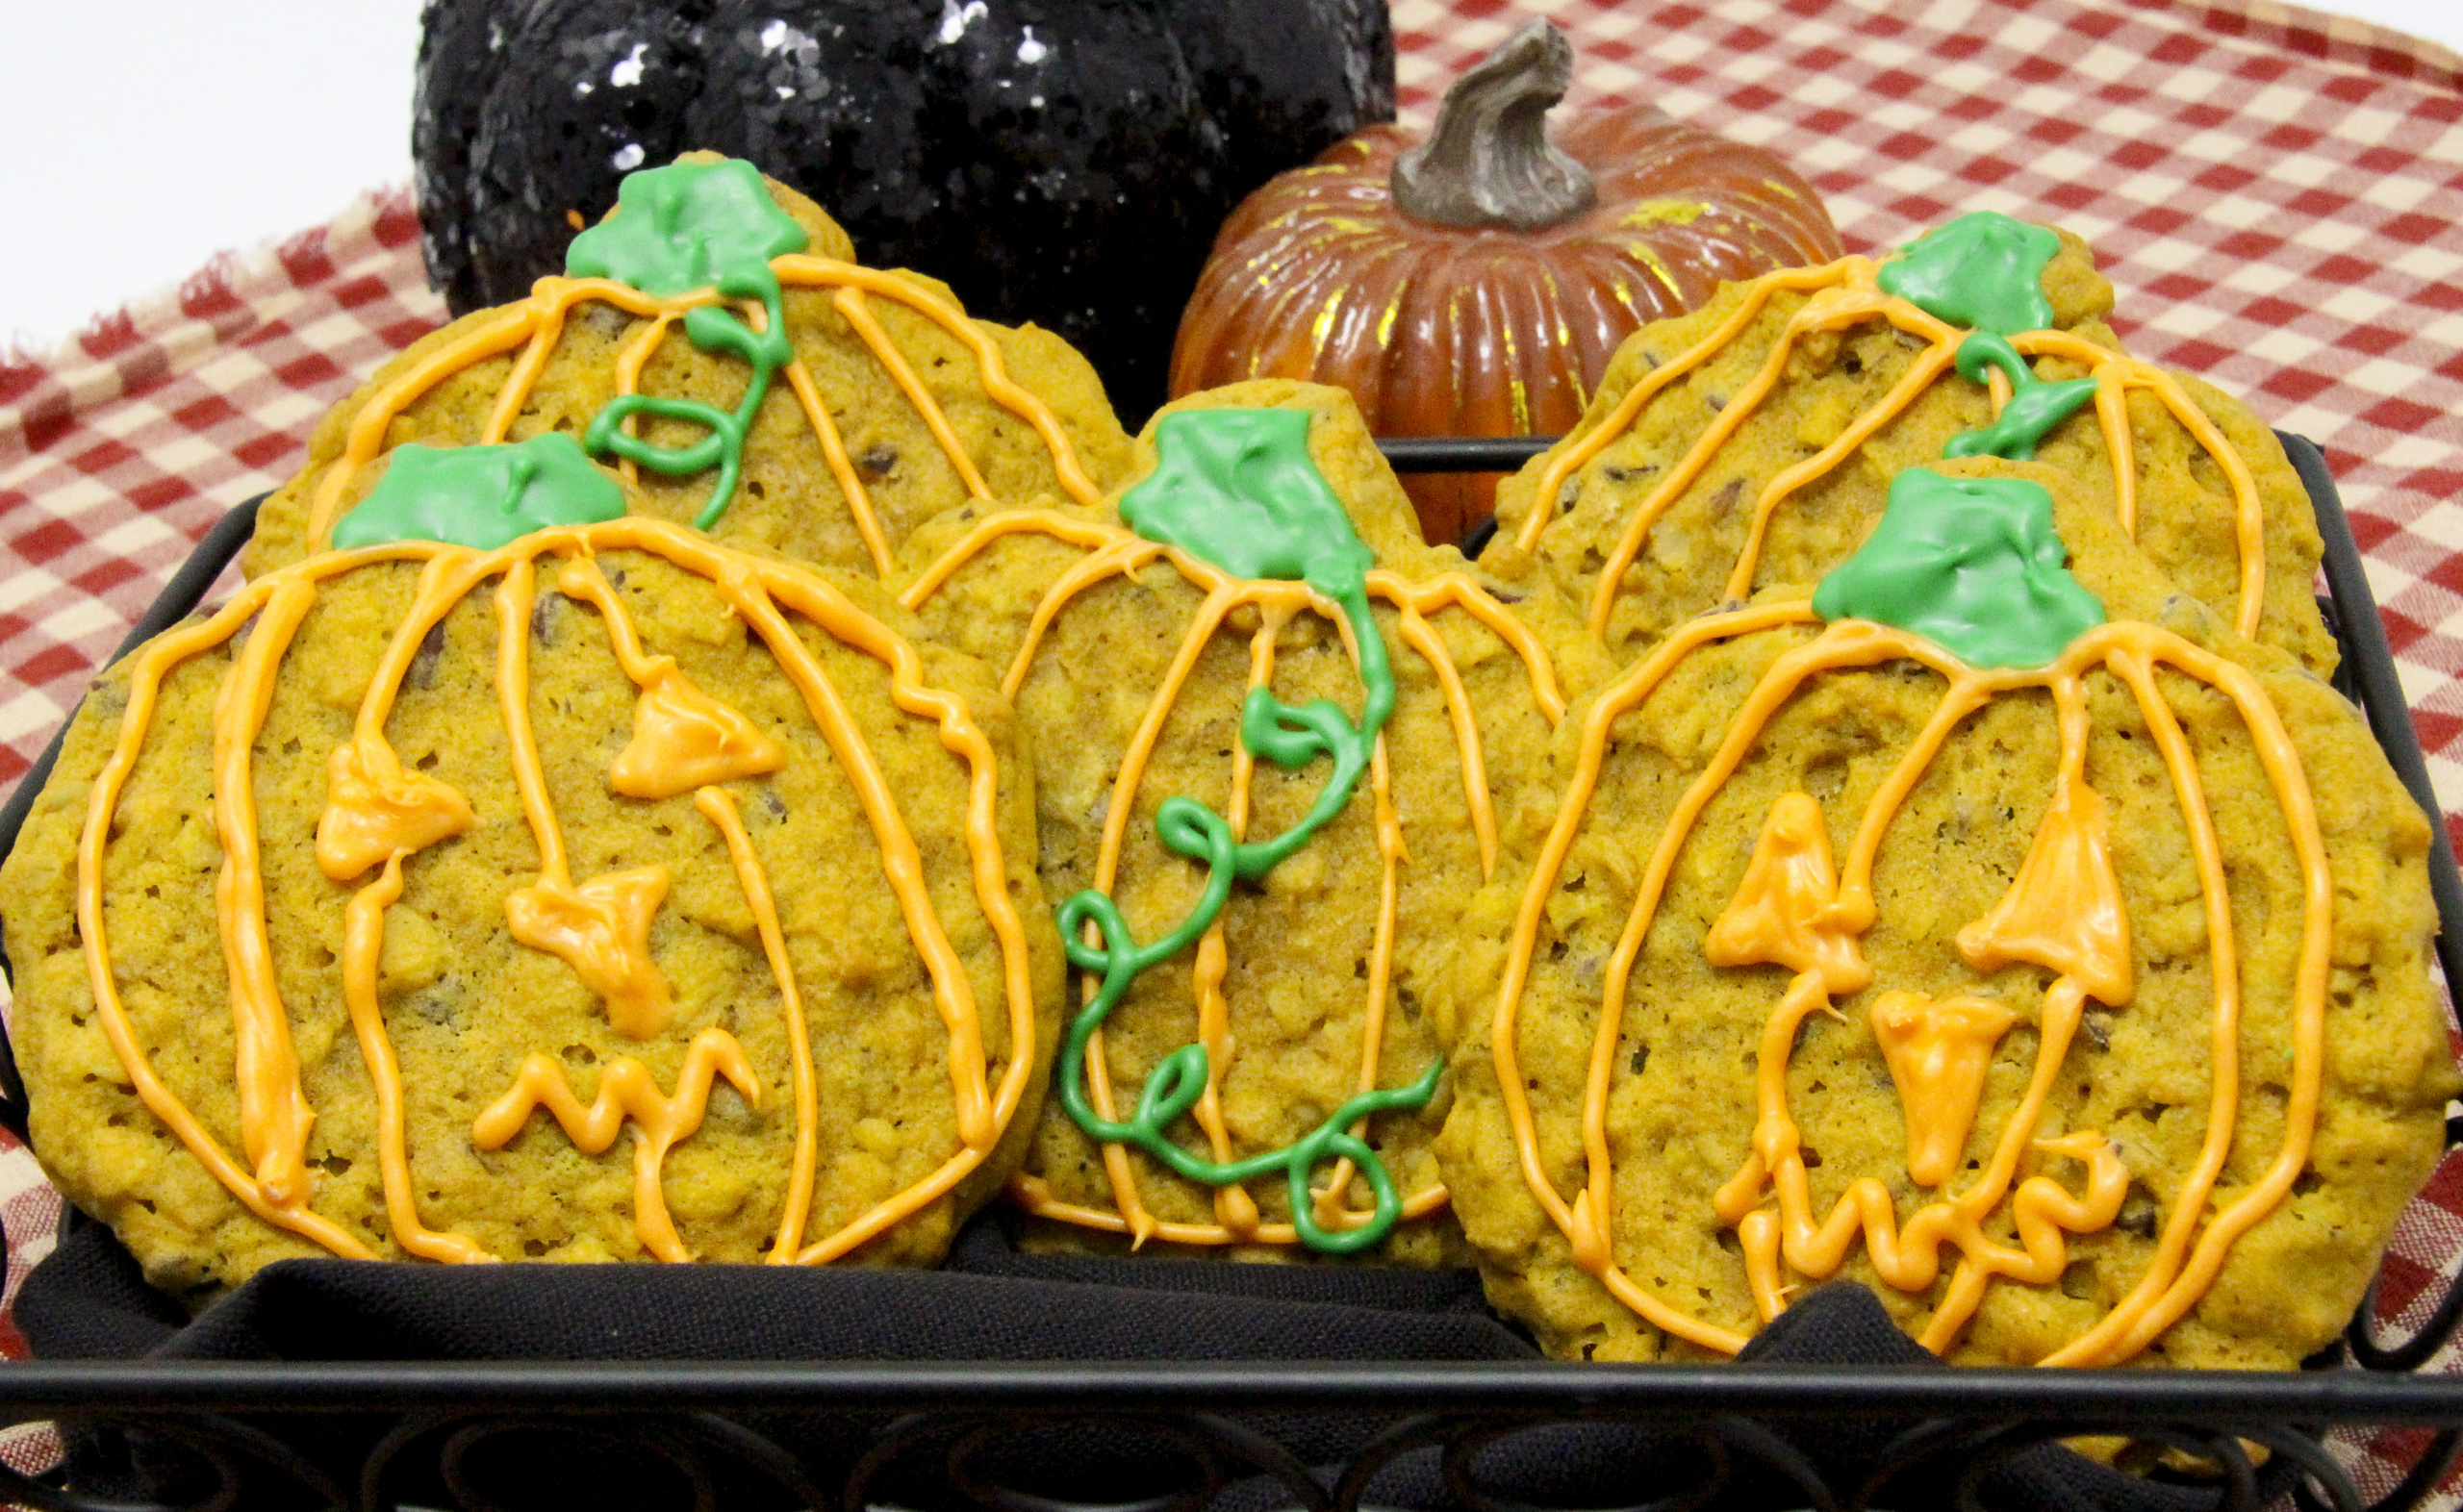 Full of flavor, these Gluten-Free Pumpkin cookies are pumpkiny and spicy, chocolately and cakey, yet moist with a crunch from the walnuts added. Recipe shared with permission granted by Barbara Ross, author of Halloween Party Murder.